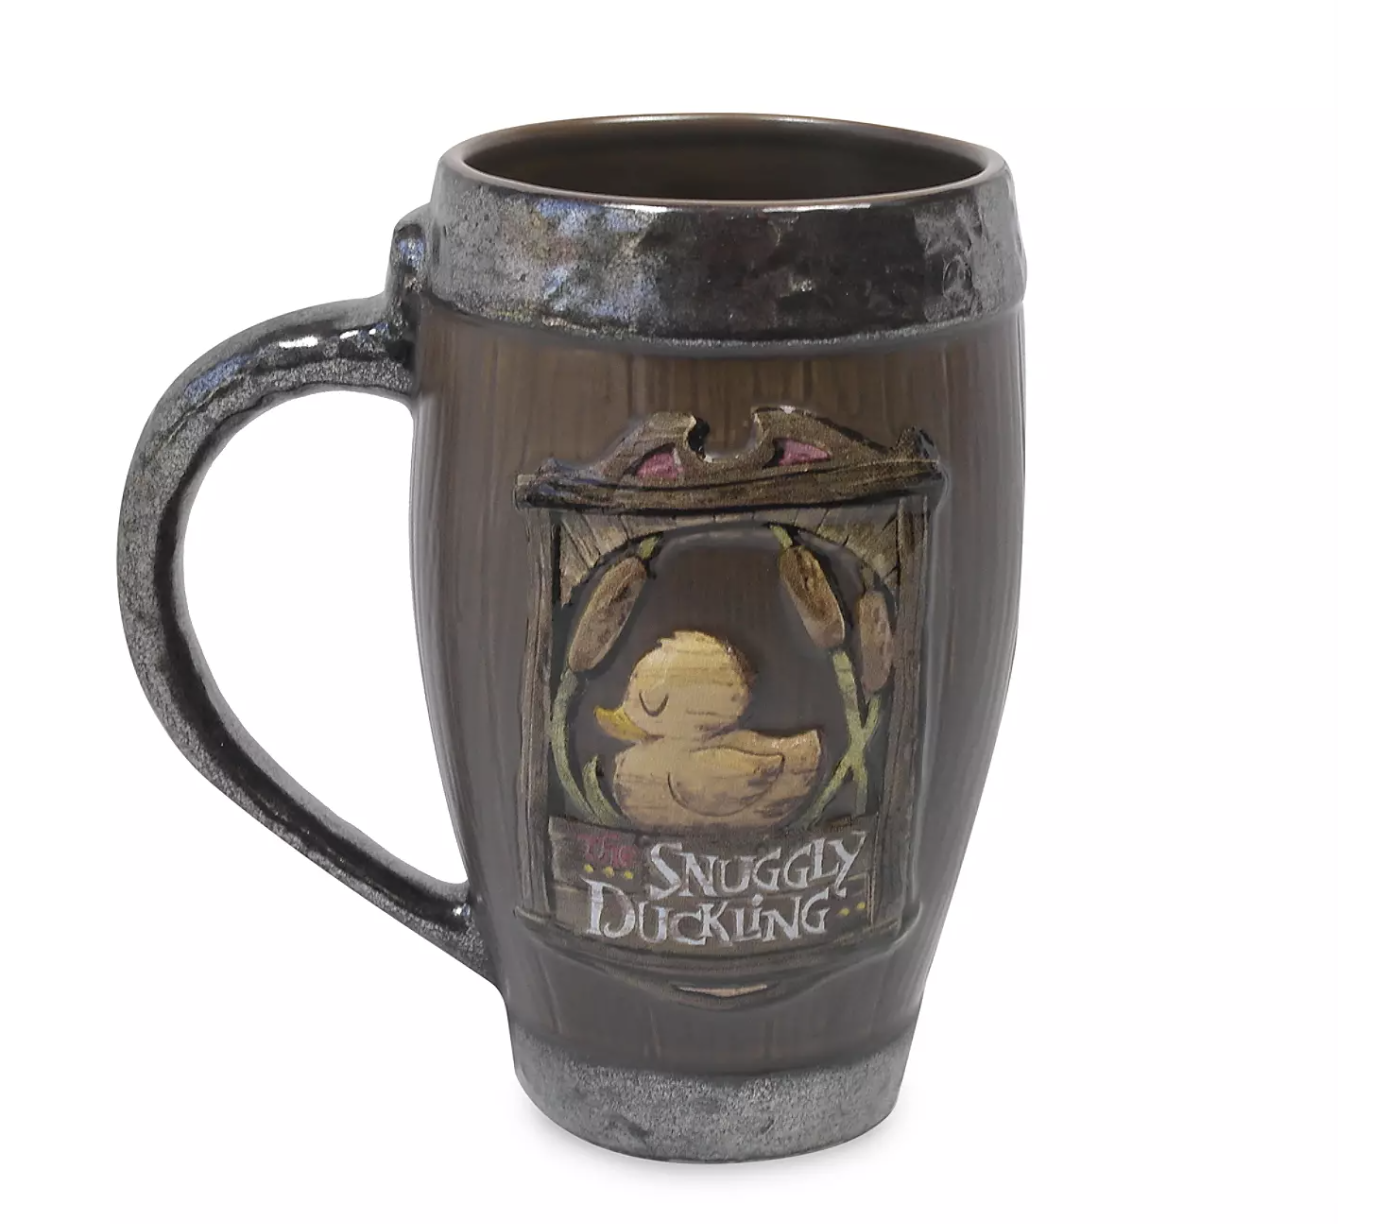 NEW Disney Mugs Featuring Sorcerer Mickey, Tangled, and More Have